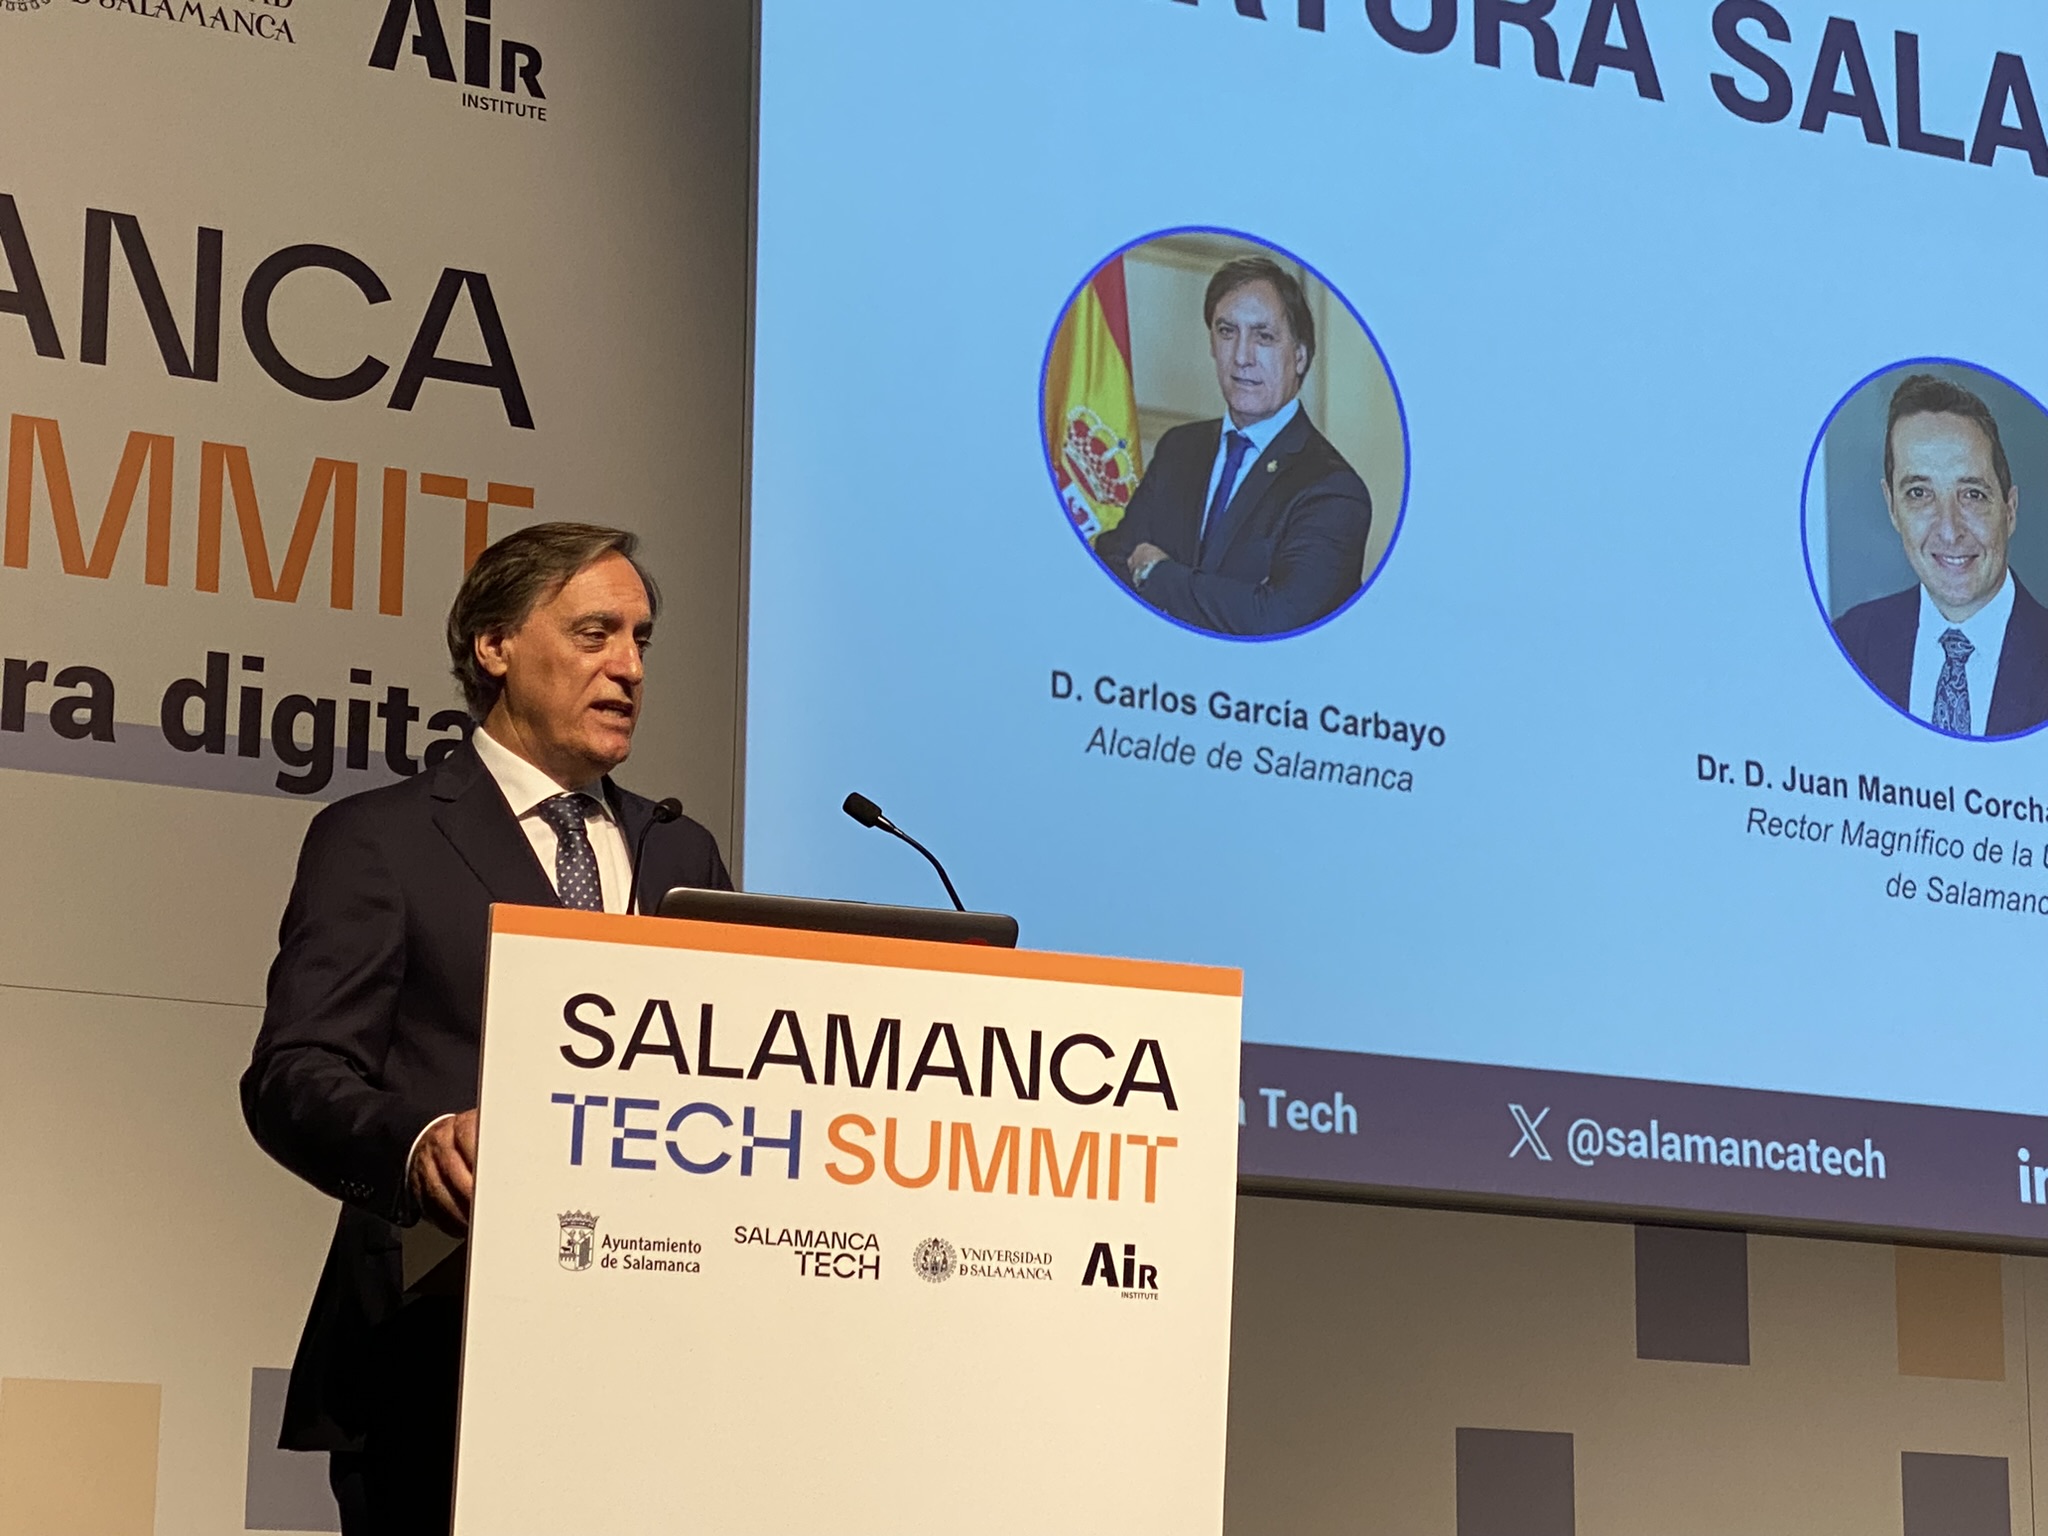 The AIR Institute, together with the City Council and the University of Salamanca, inaugurate the Salamanca Tech Summit